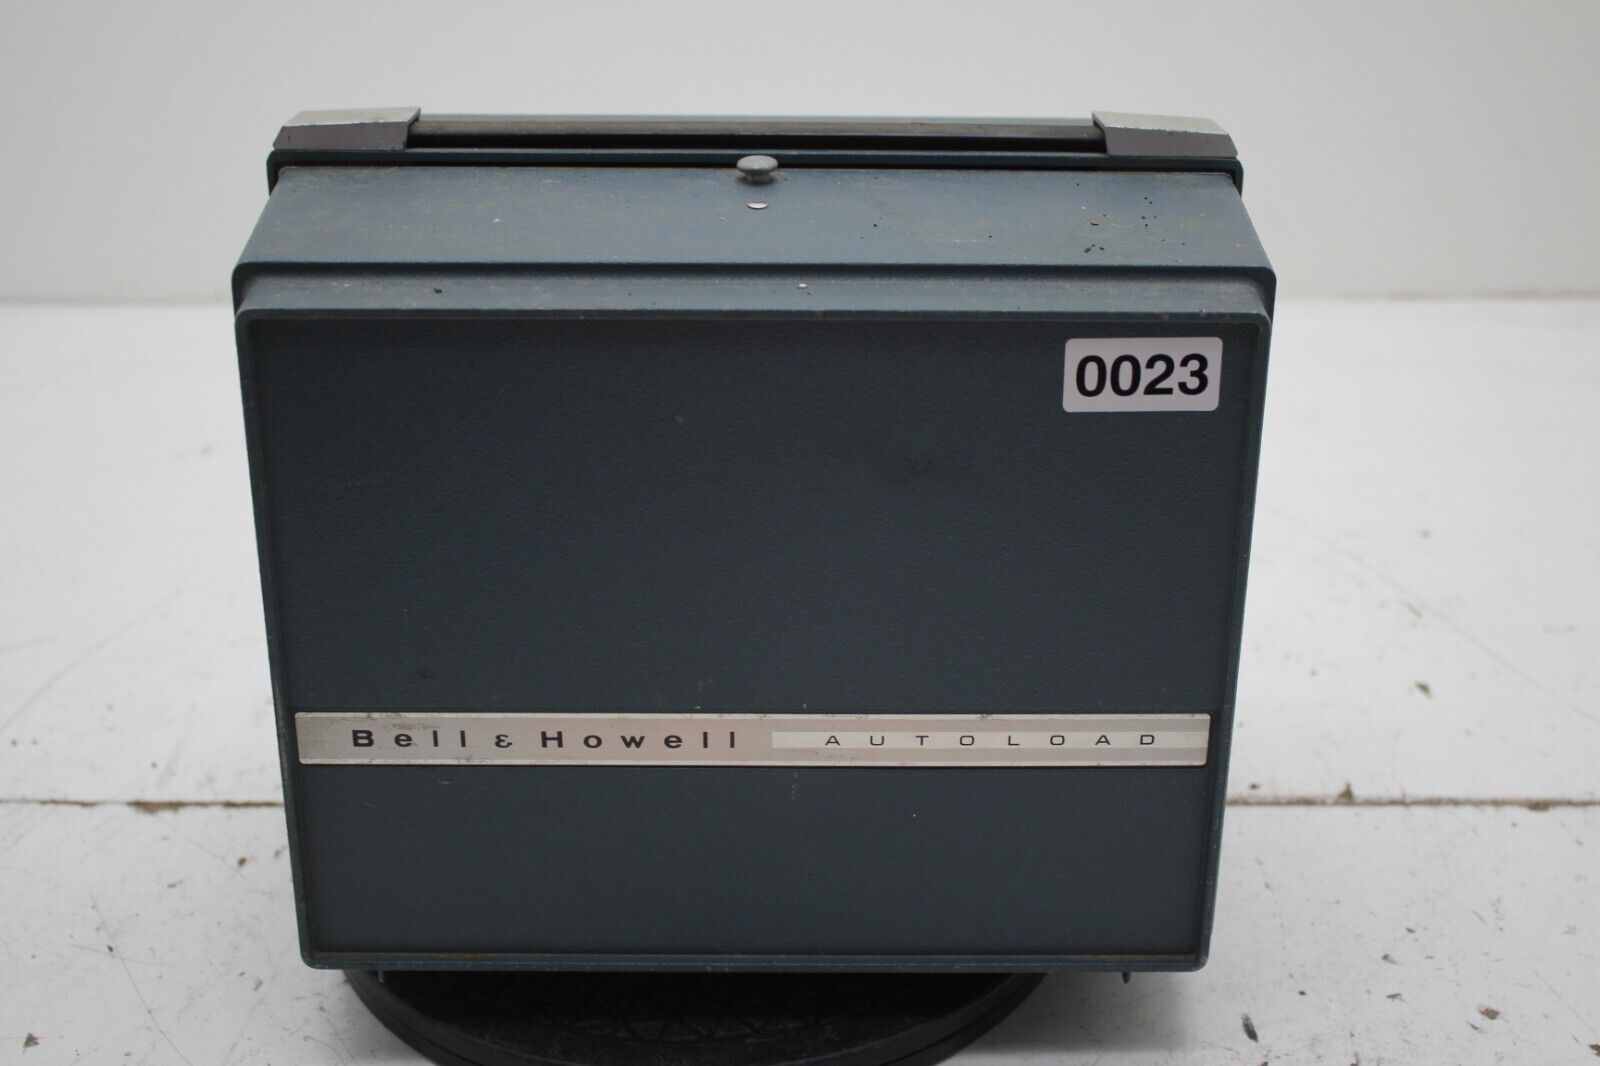 Vintage Bell & Howell Autoload Movie Projector For Super 8 Film 482a